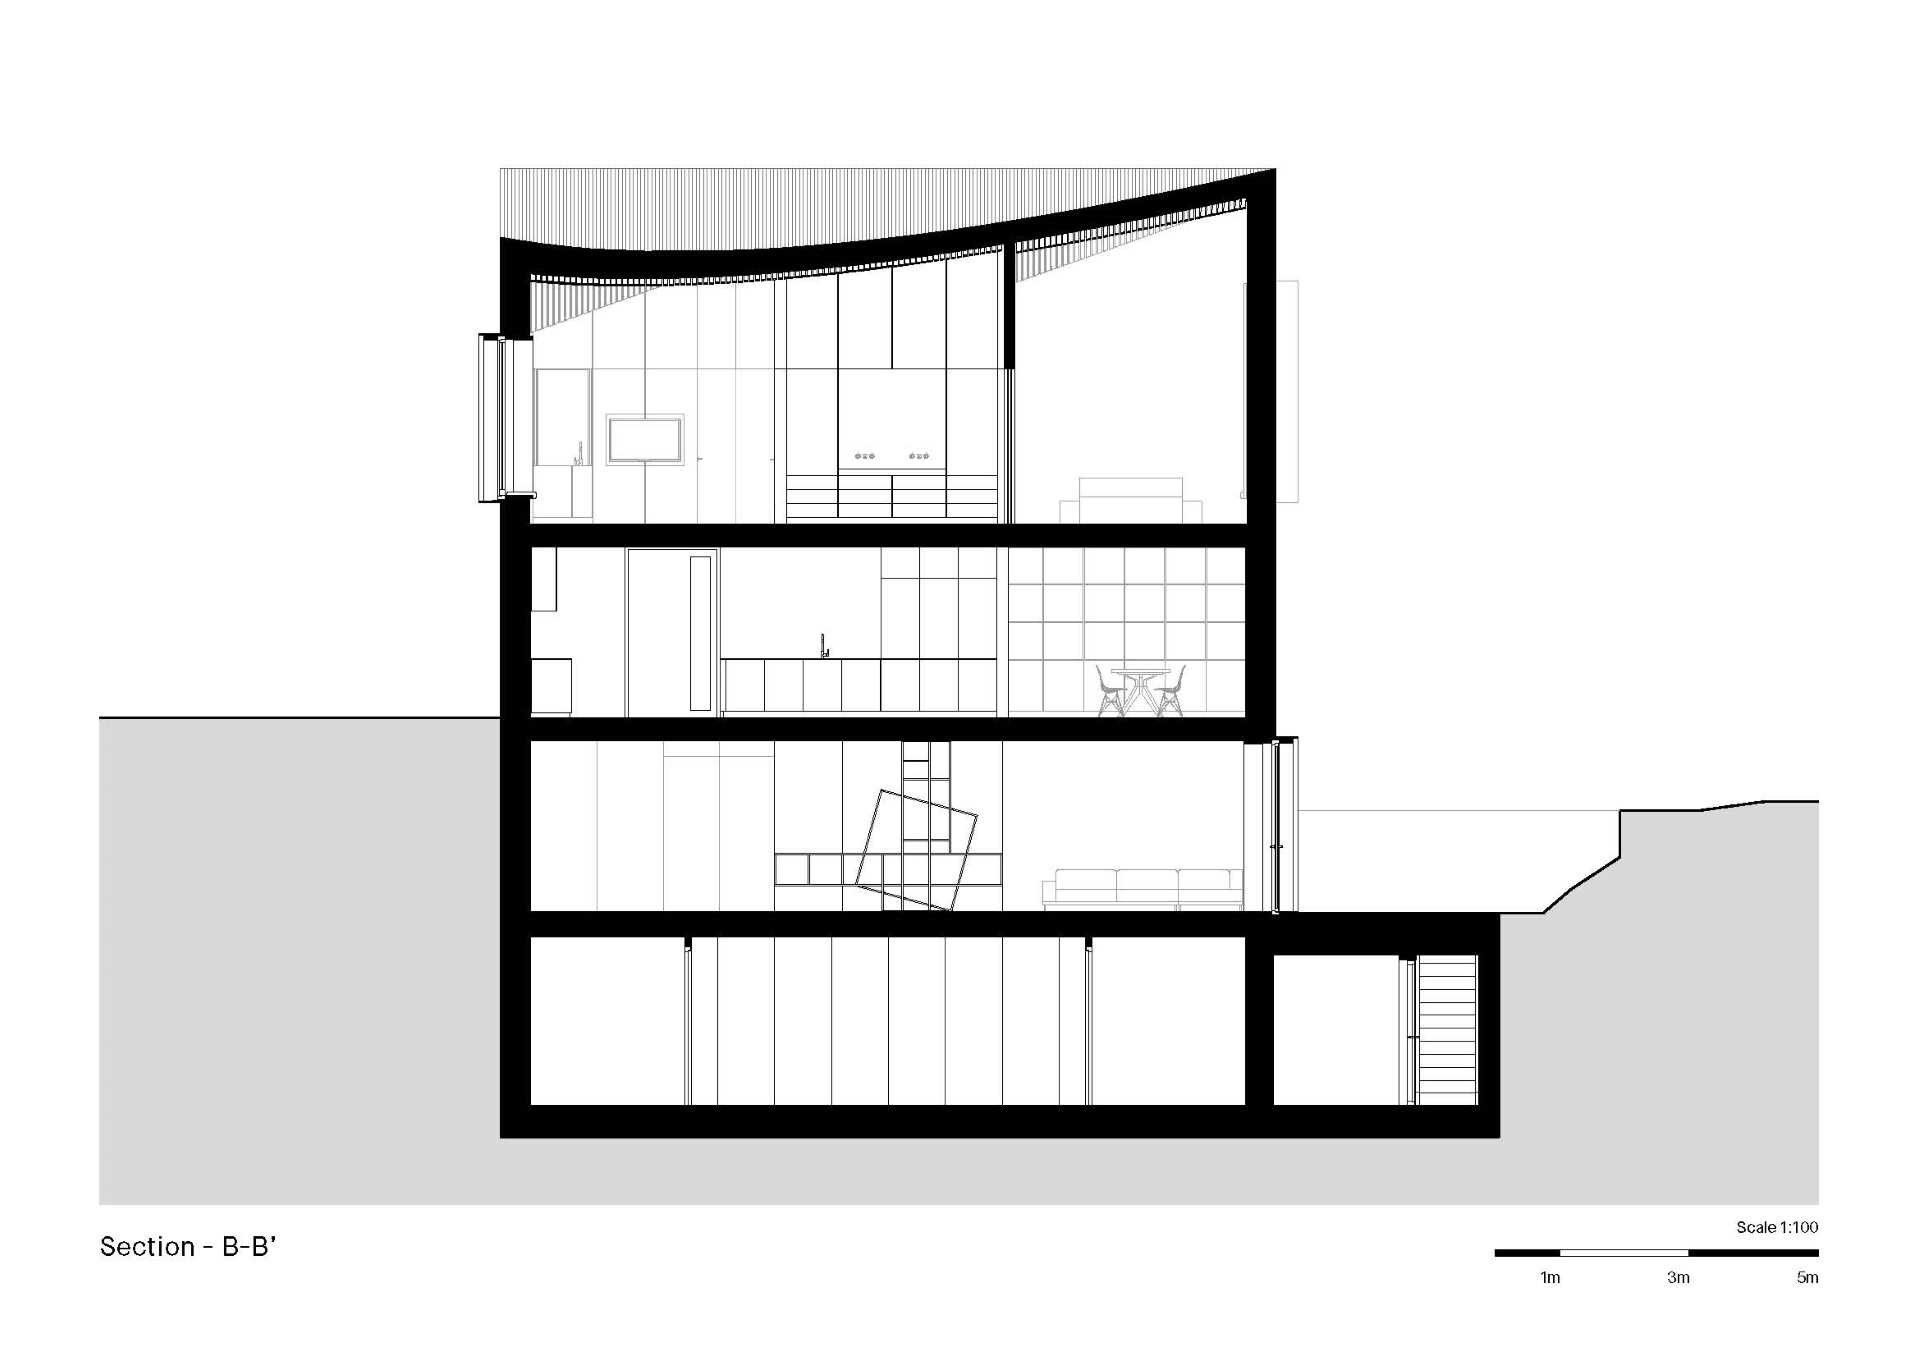 The section diagram of a modern house.